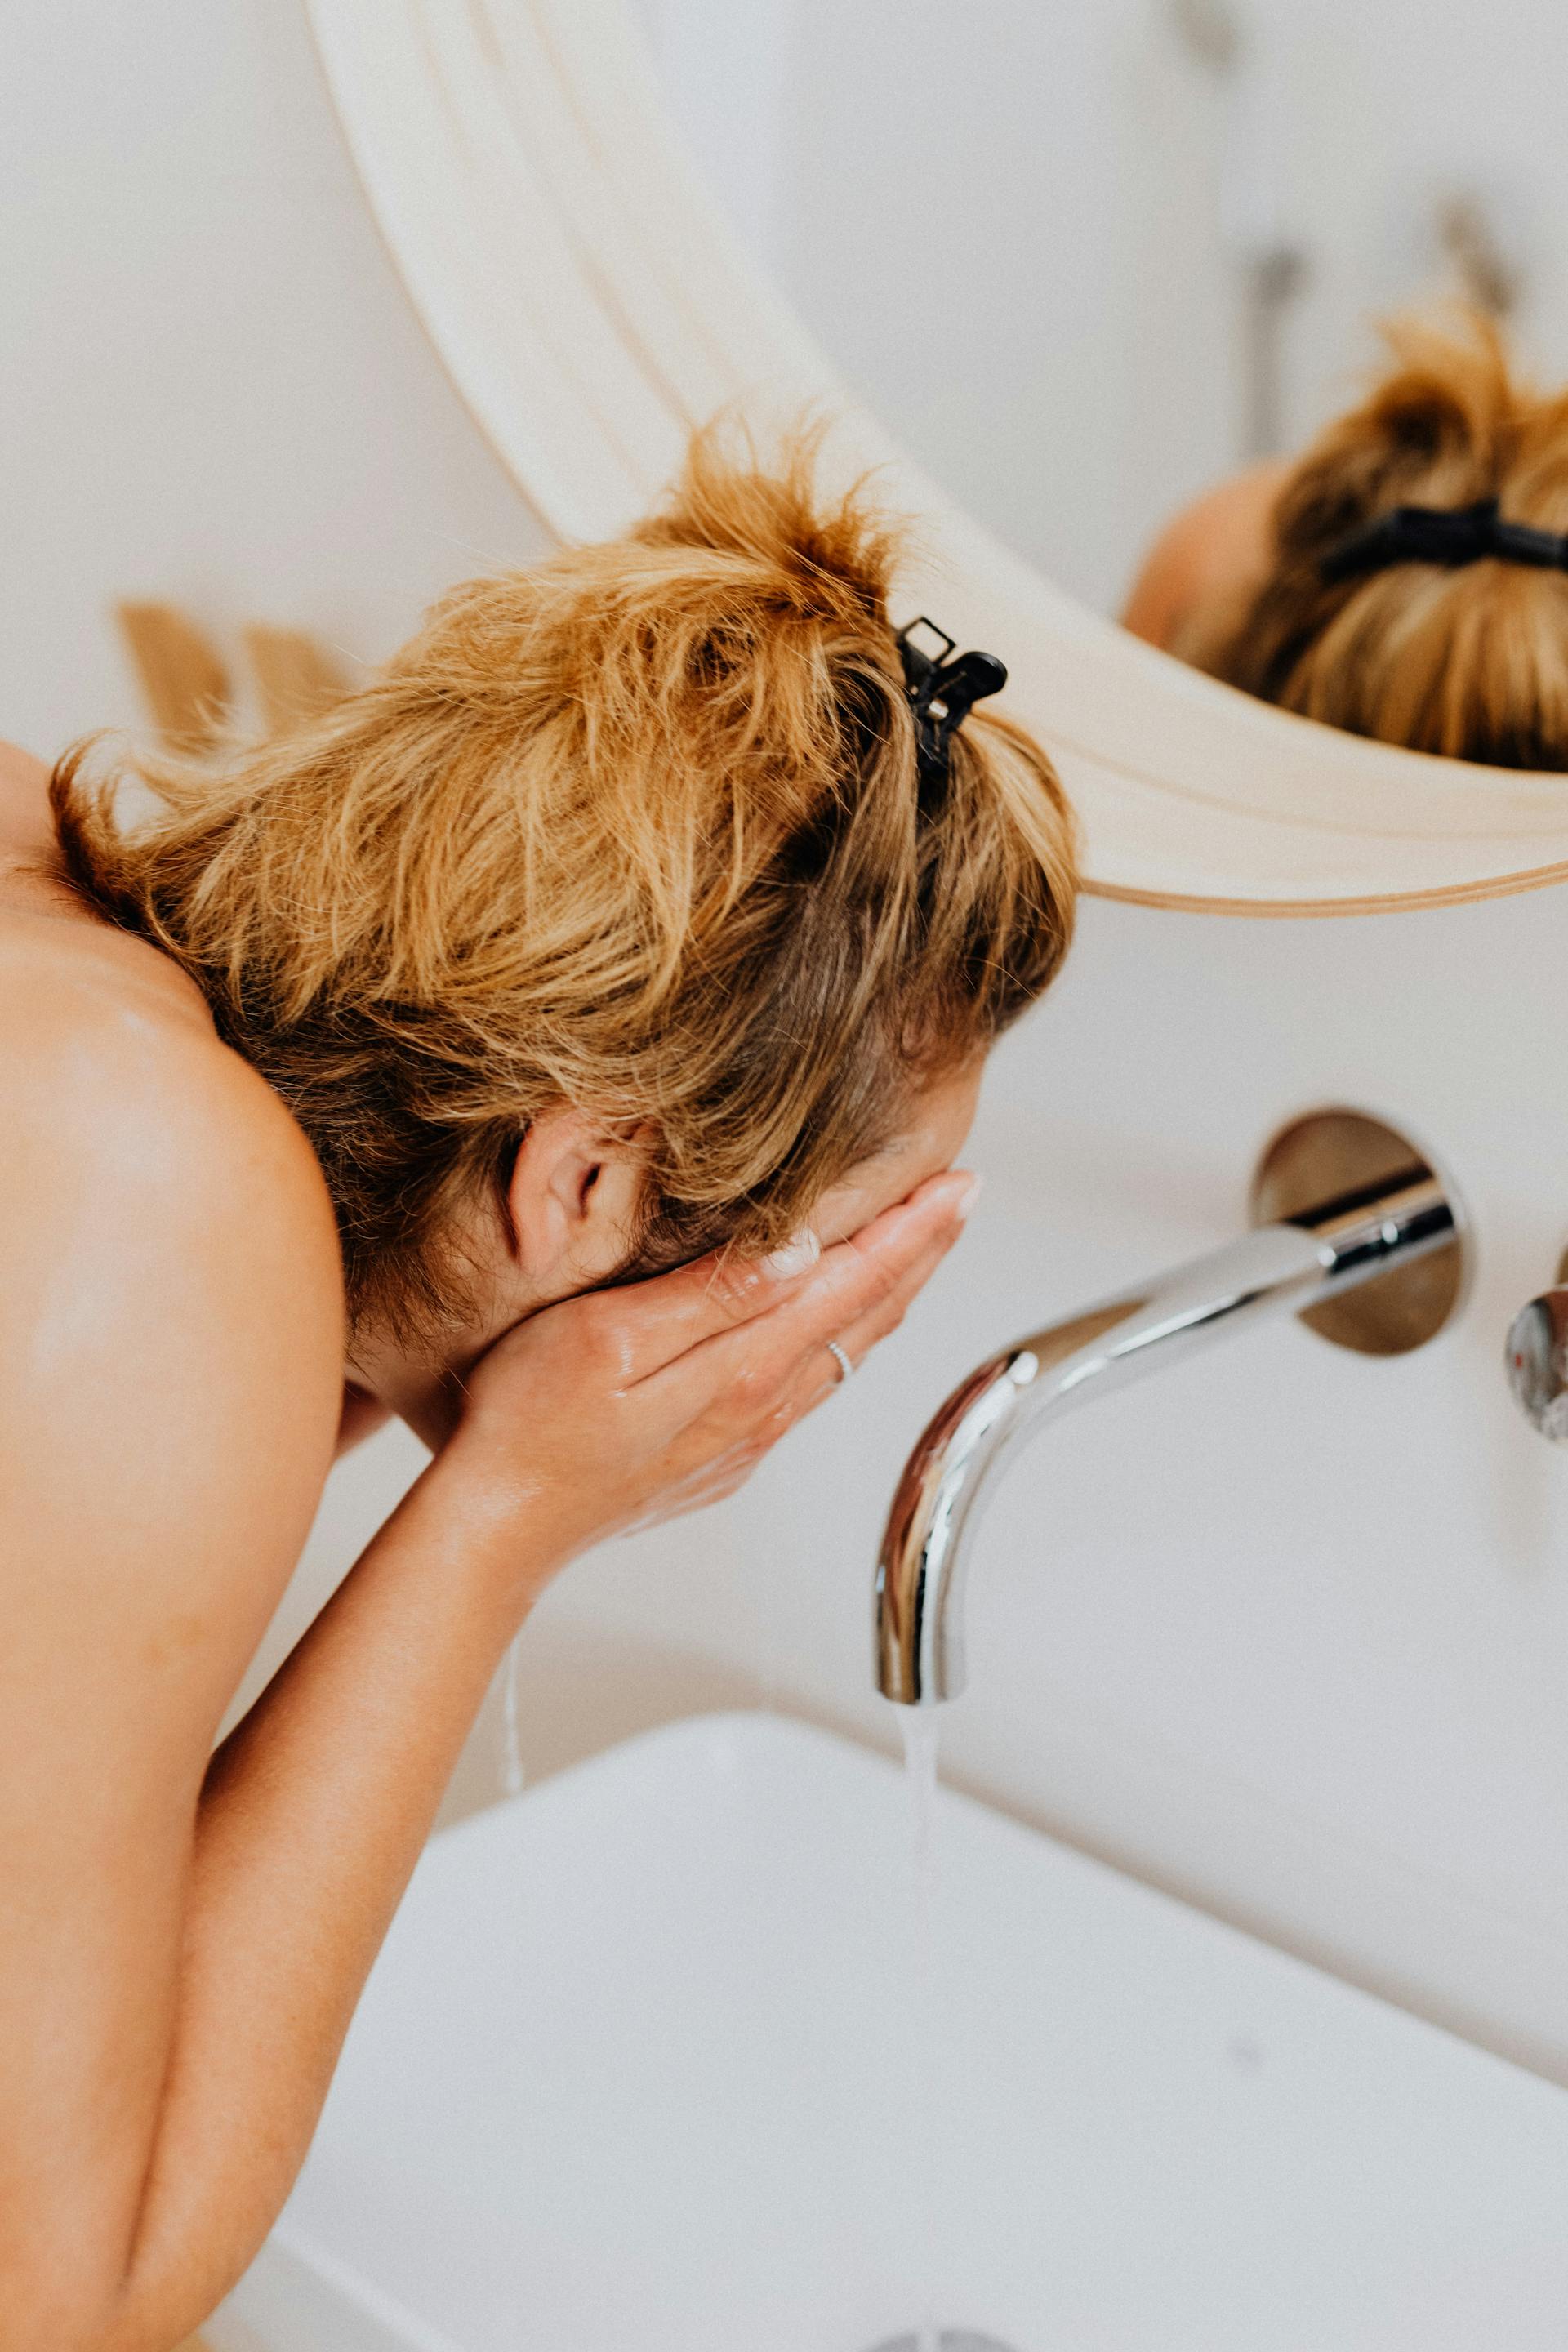 A woman splashing water on her face in the washroom | Source: Pexels